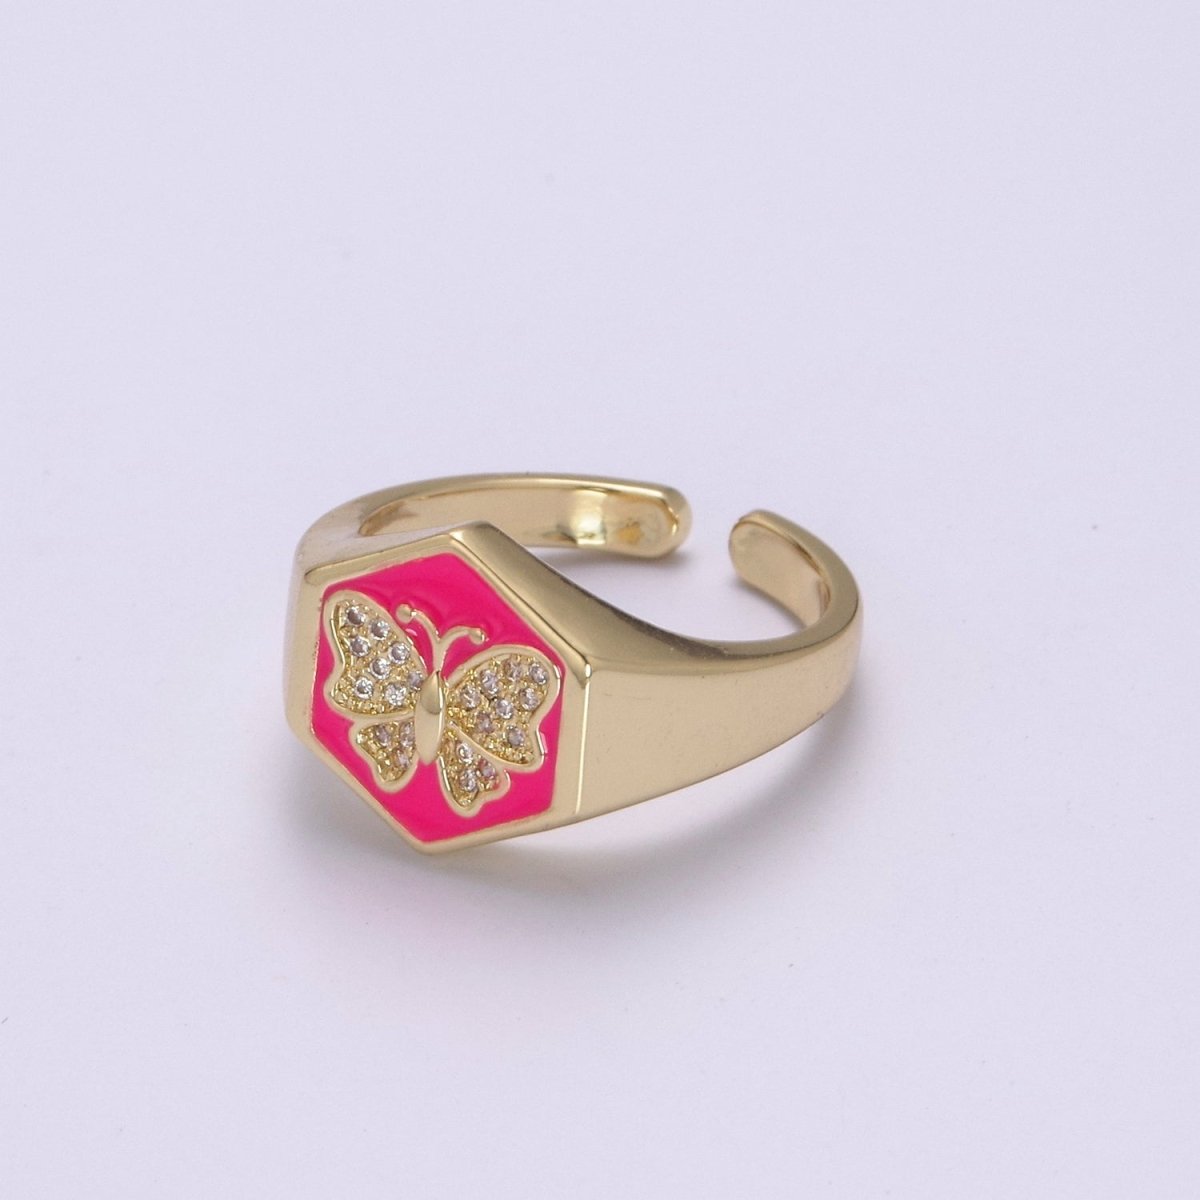 Gold signet ring, Butterfly signet ring, Enamel ring gold butterfly ring Stackable Jewelry U-171~U-175 - DLUXCA